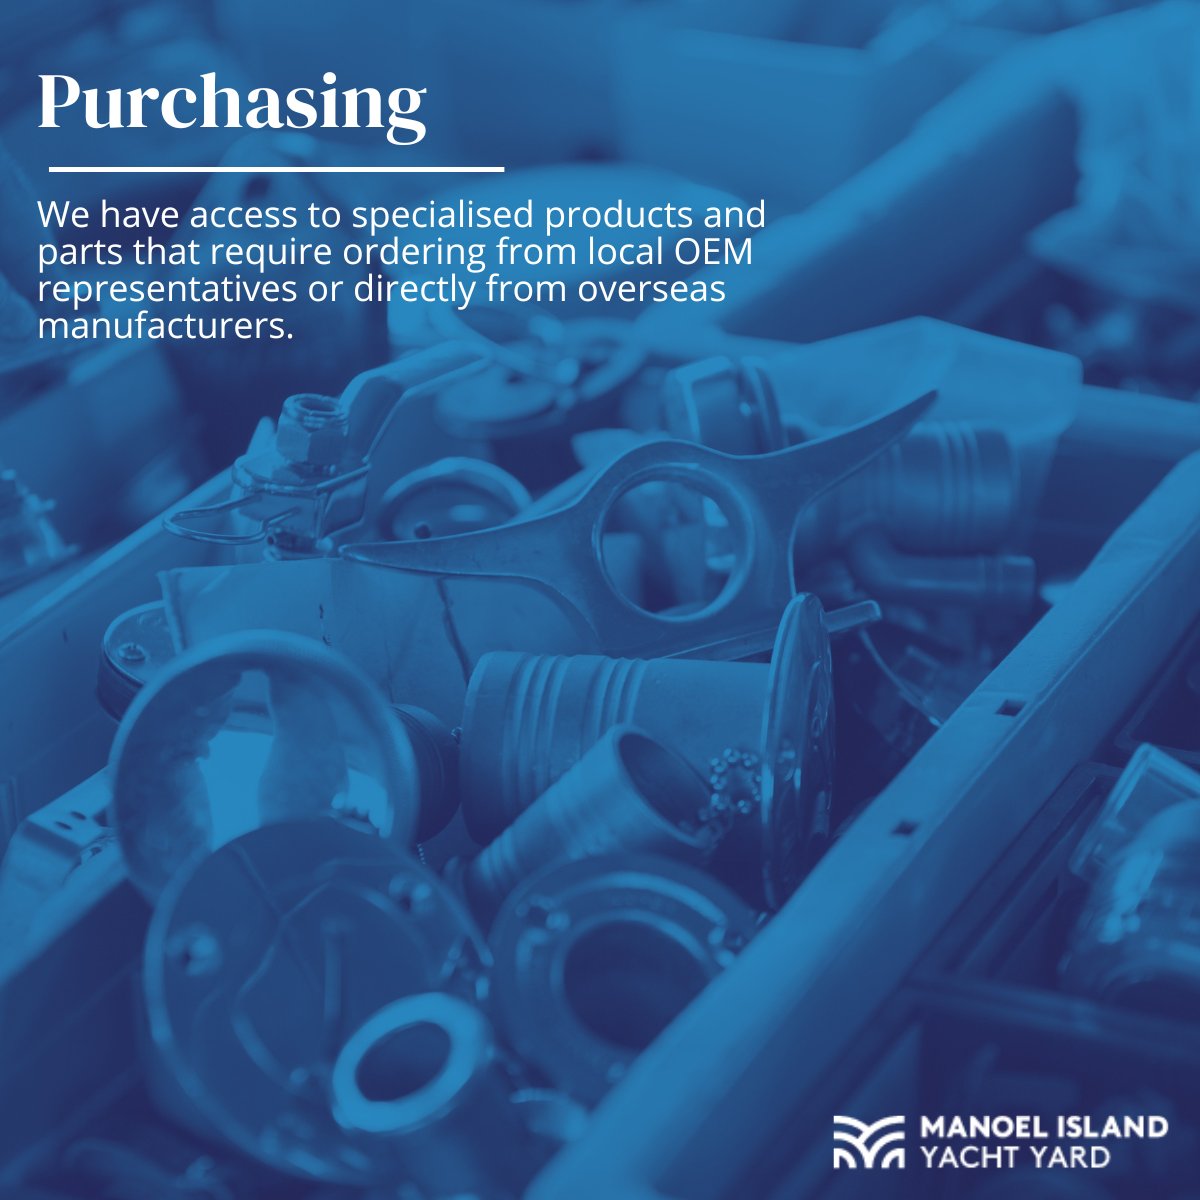 Did you know we have an in-house store that provides a wide range of products off the shelf?

For more info, head to our website or get in contact at info@yachtyard-malta.com

bit.ly/3K1DuUK

#Manoelislandyachtyard #superyachtrefit #Boatmaintenance